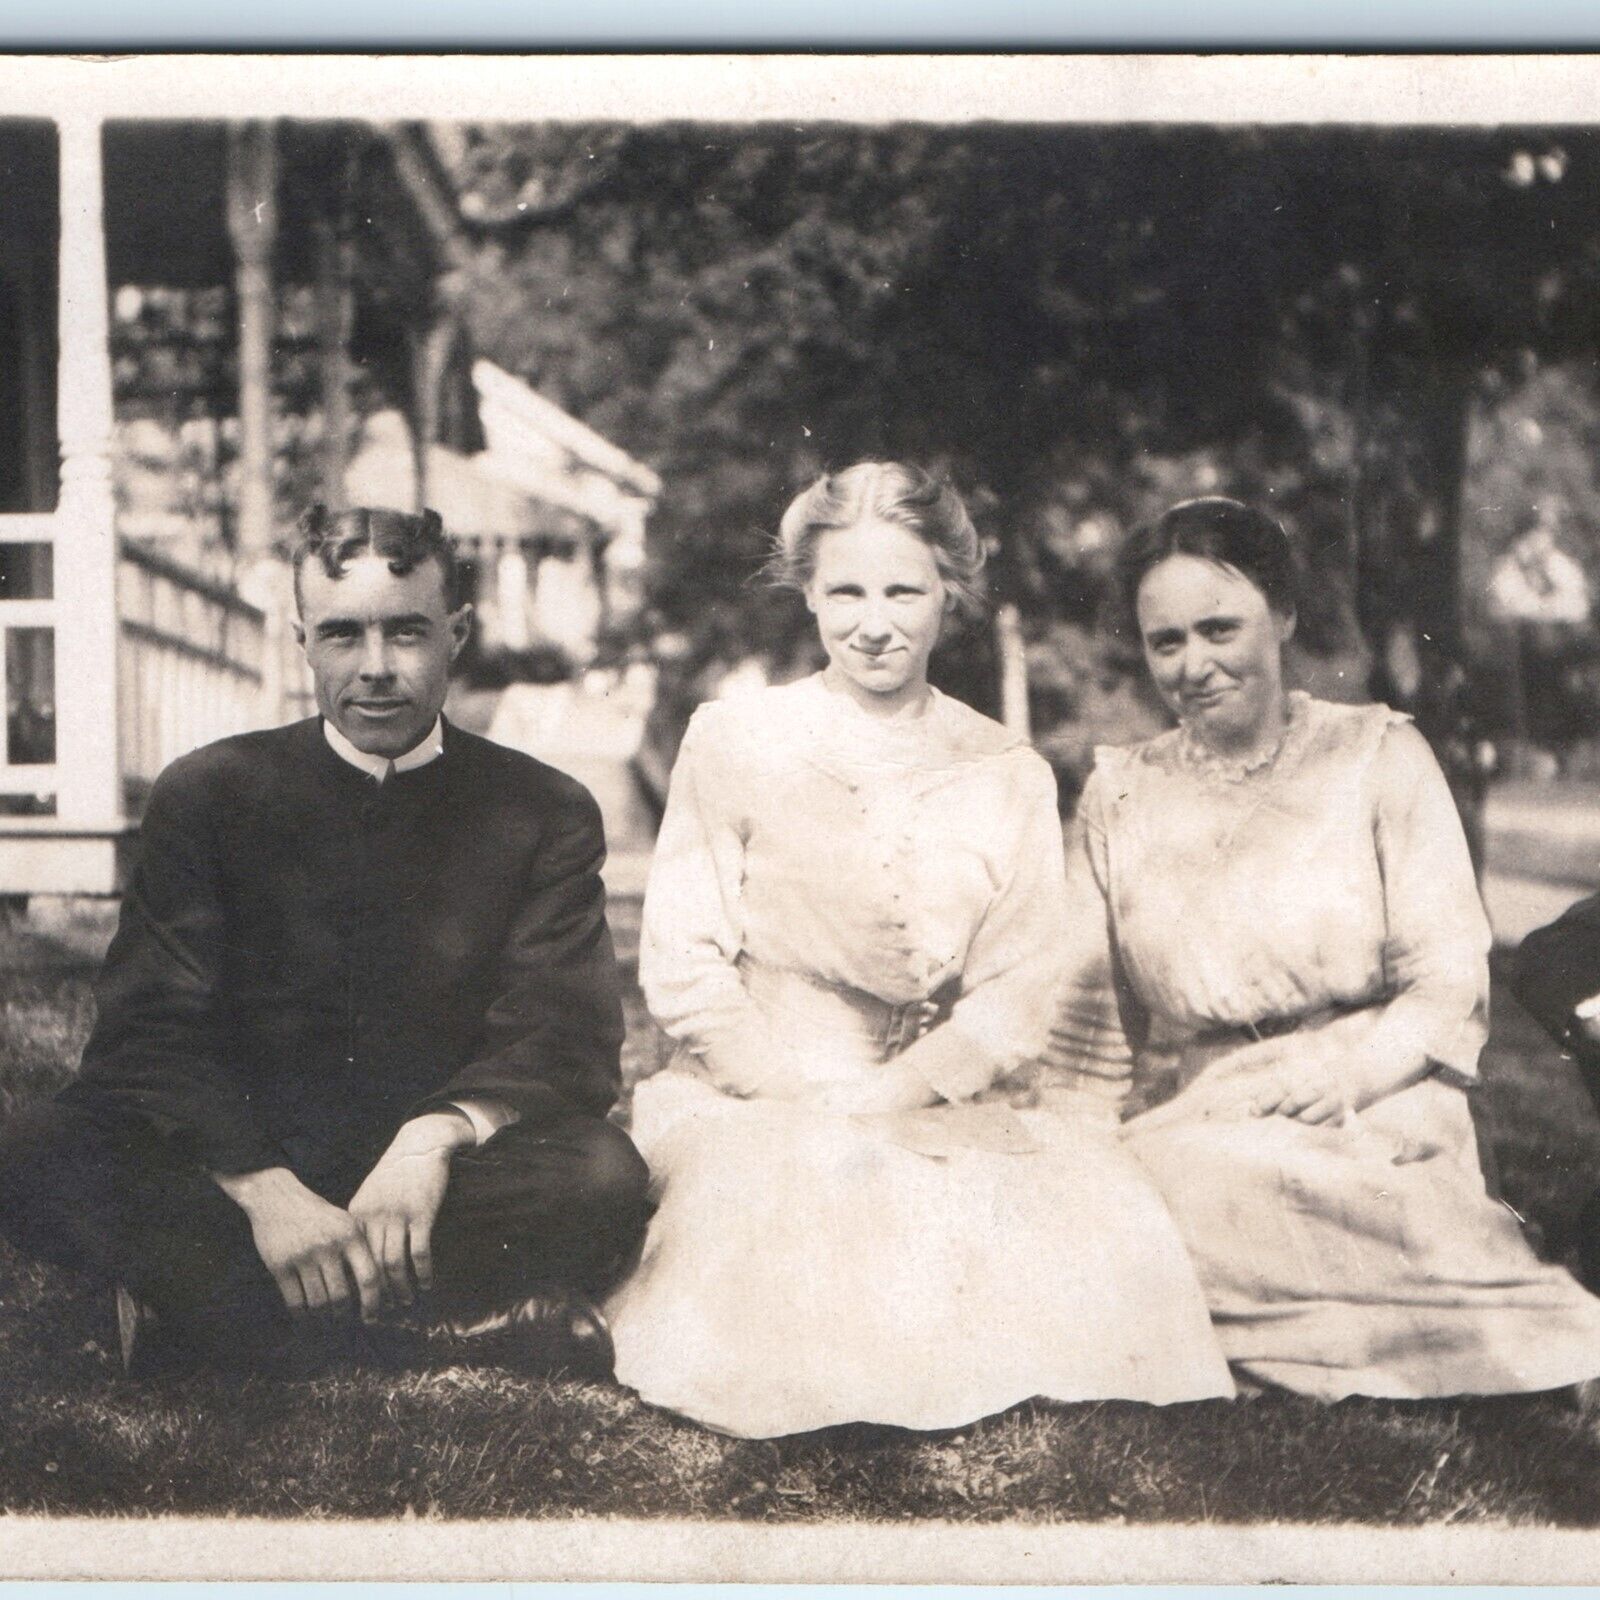 c1910s Group Outdoors in Lawn RPPC Women Man Weird Hairdo Houses Real Photo A261